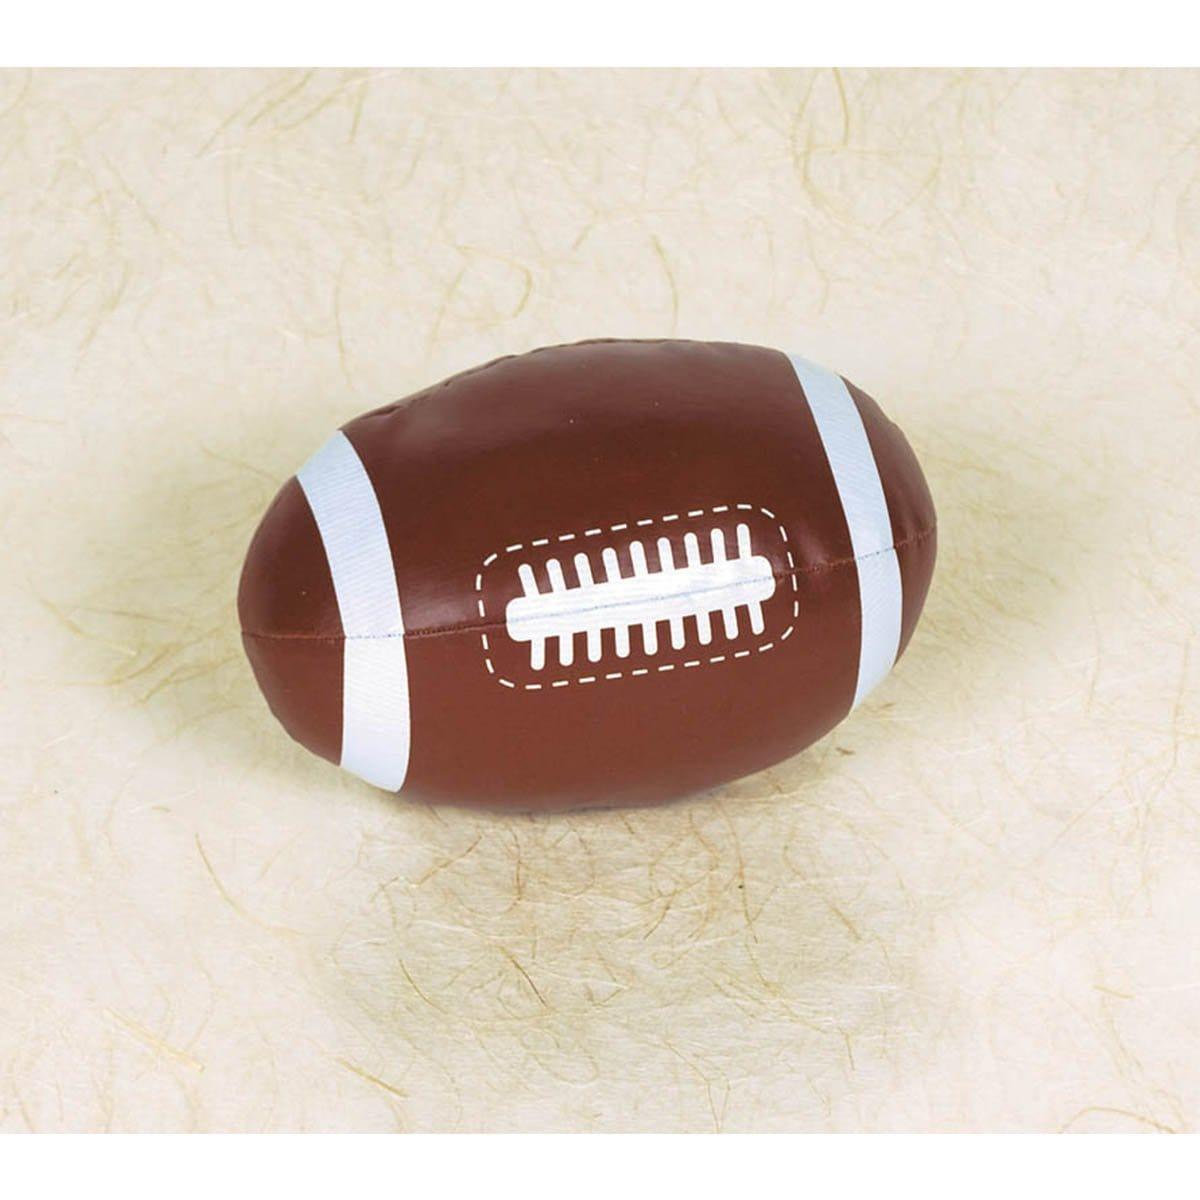 Buy Superbowl Football Soft Ball sold at Party Expert